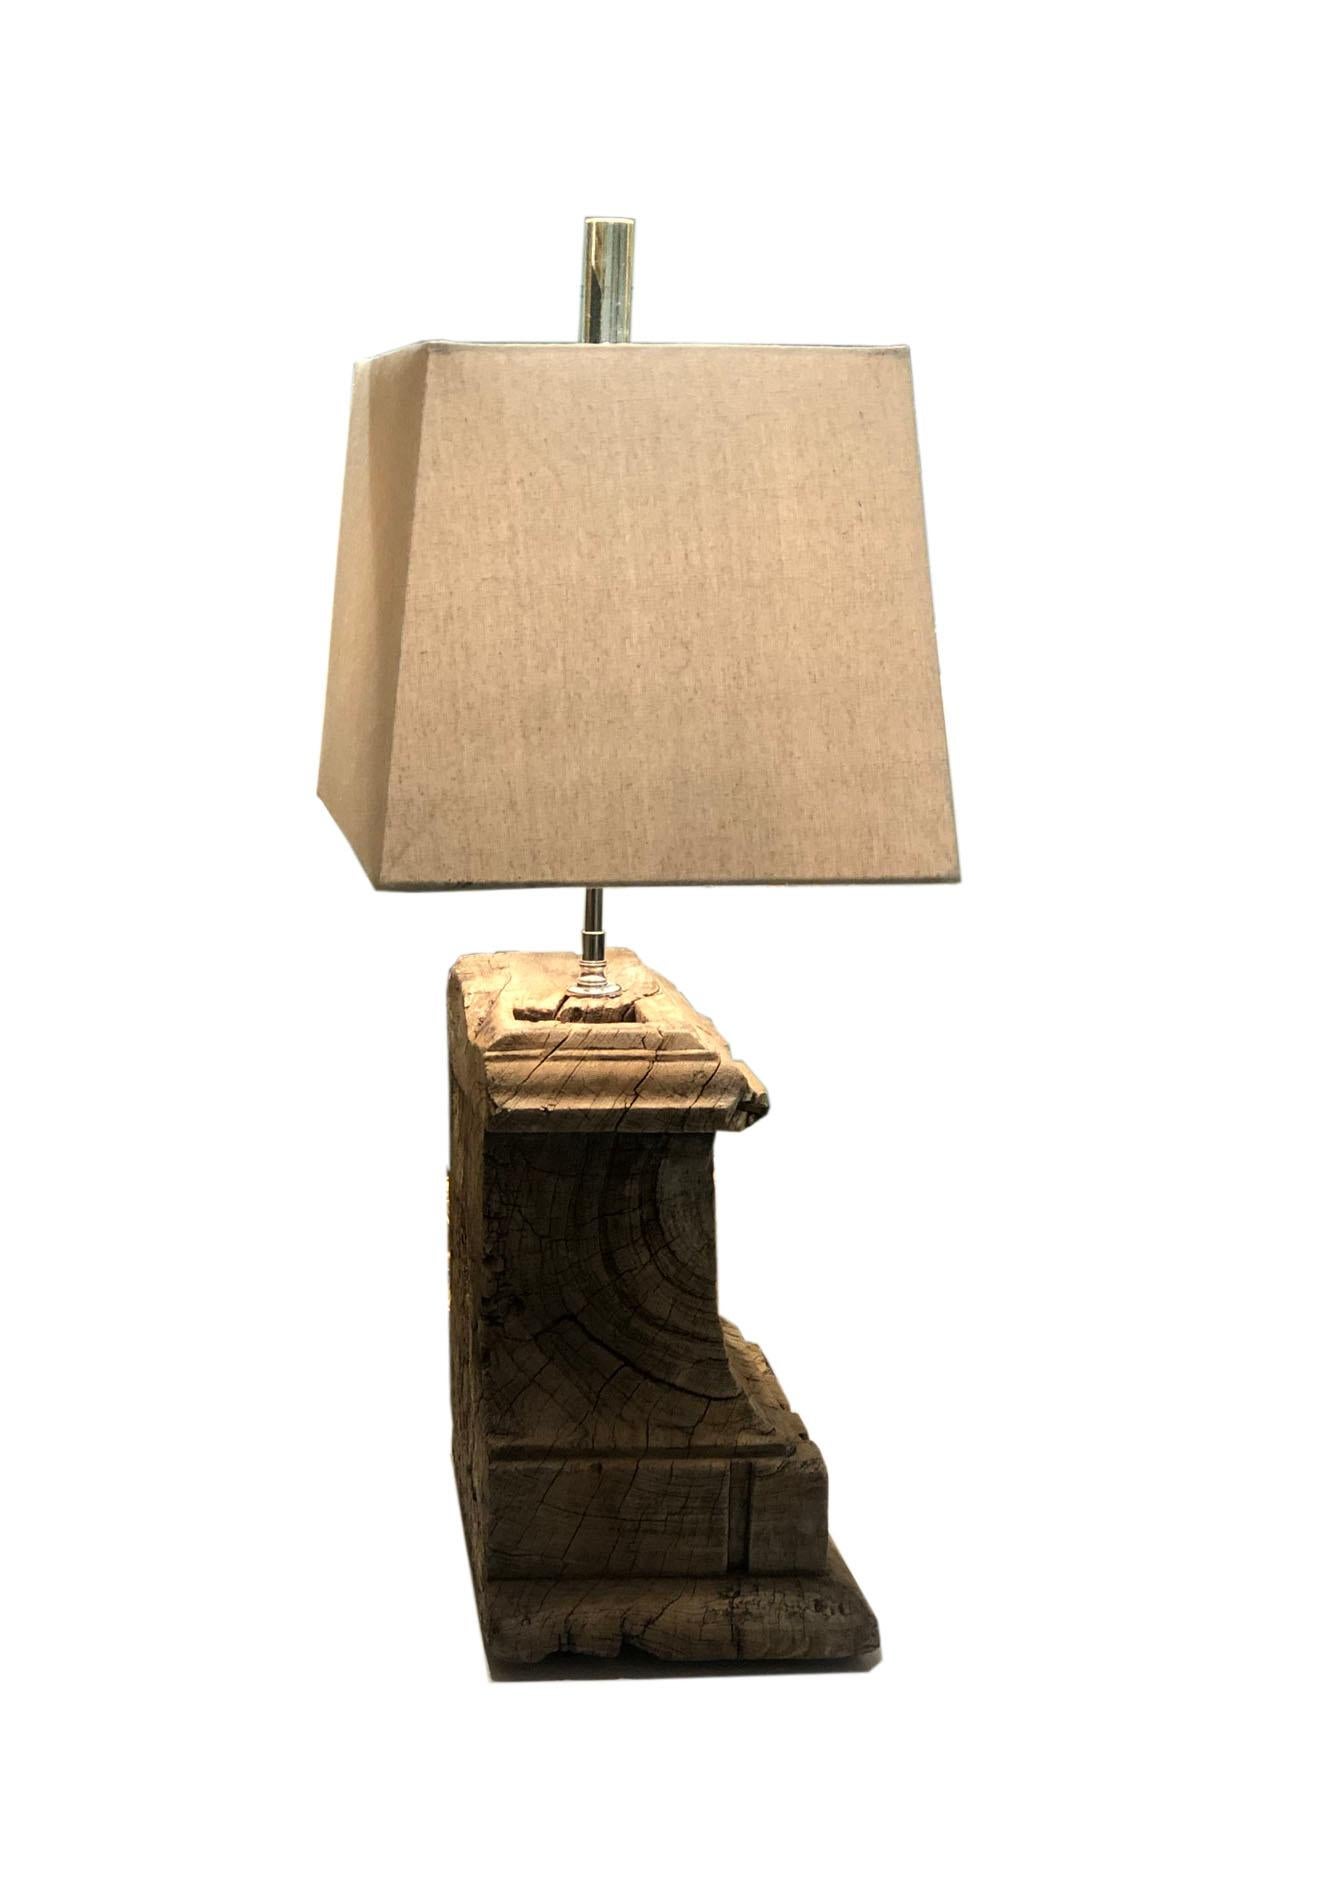 19th Century Antique Wood Fragment Lamp with Shade